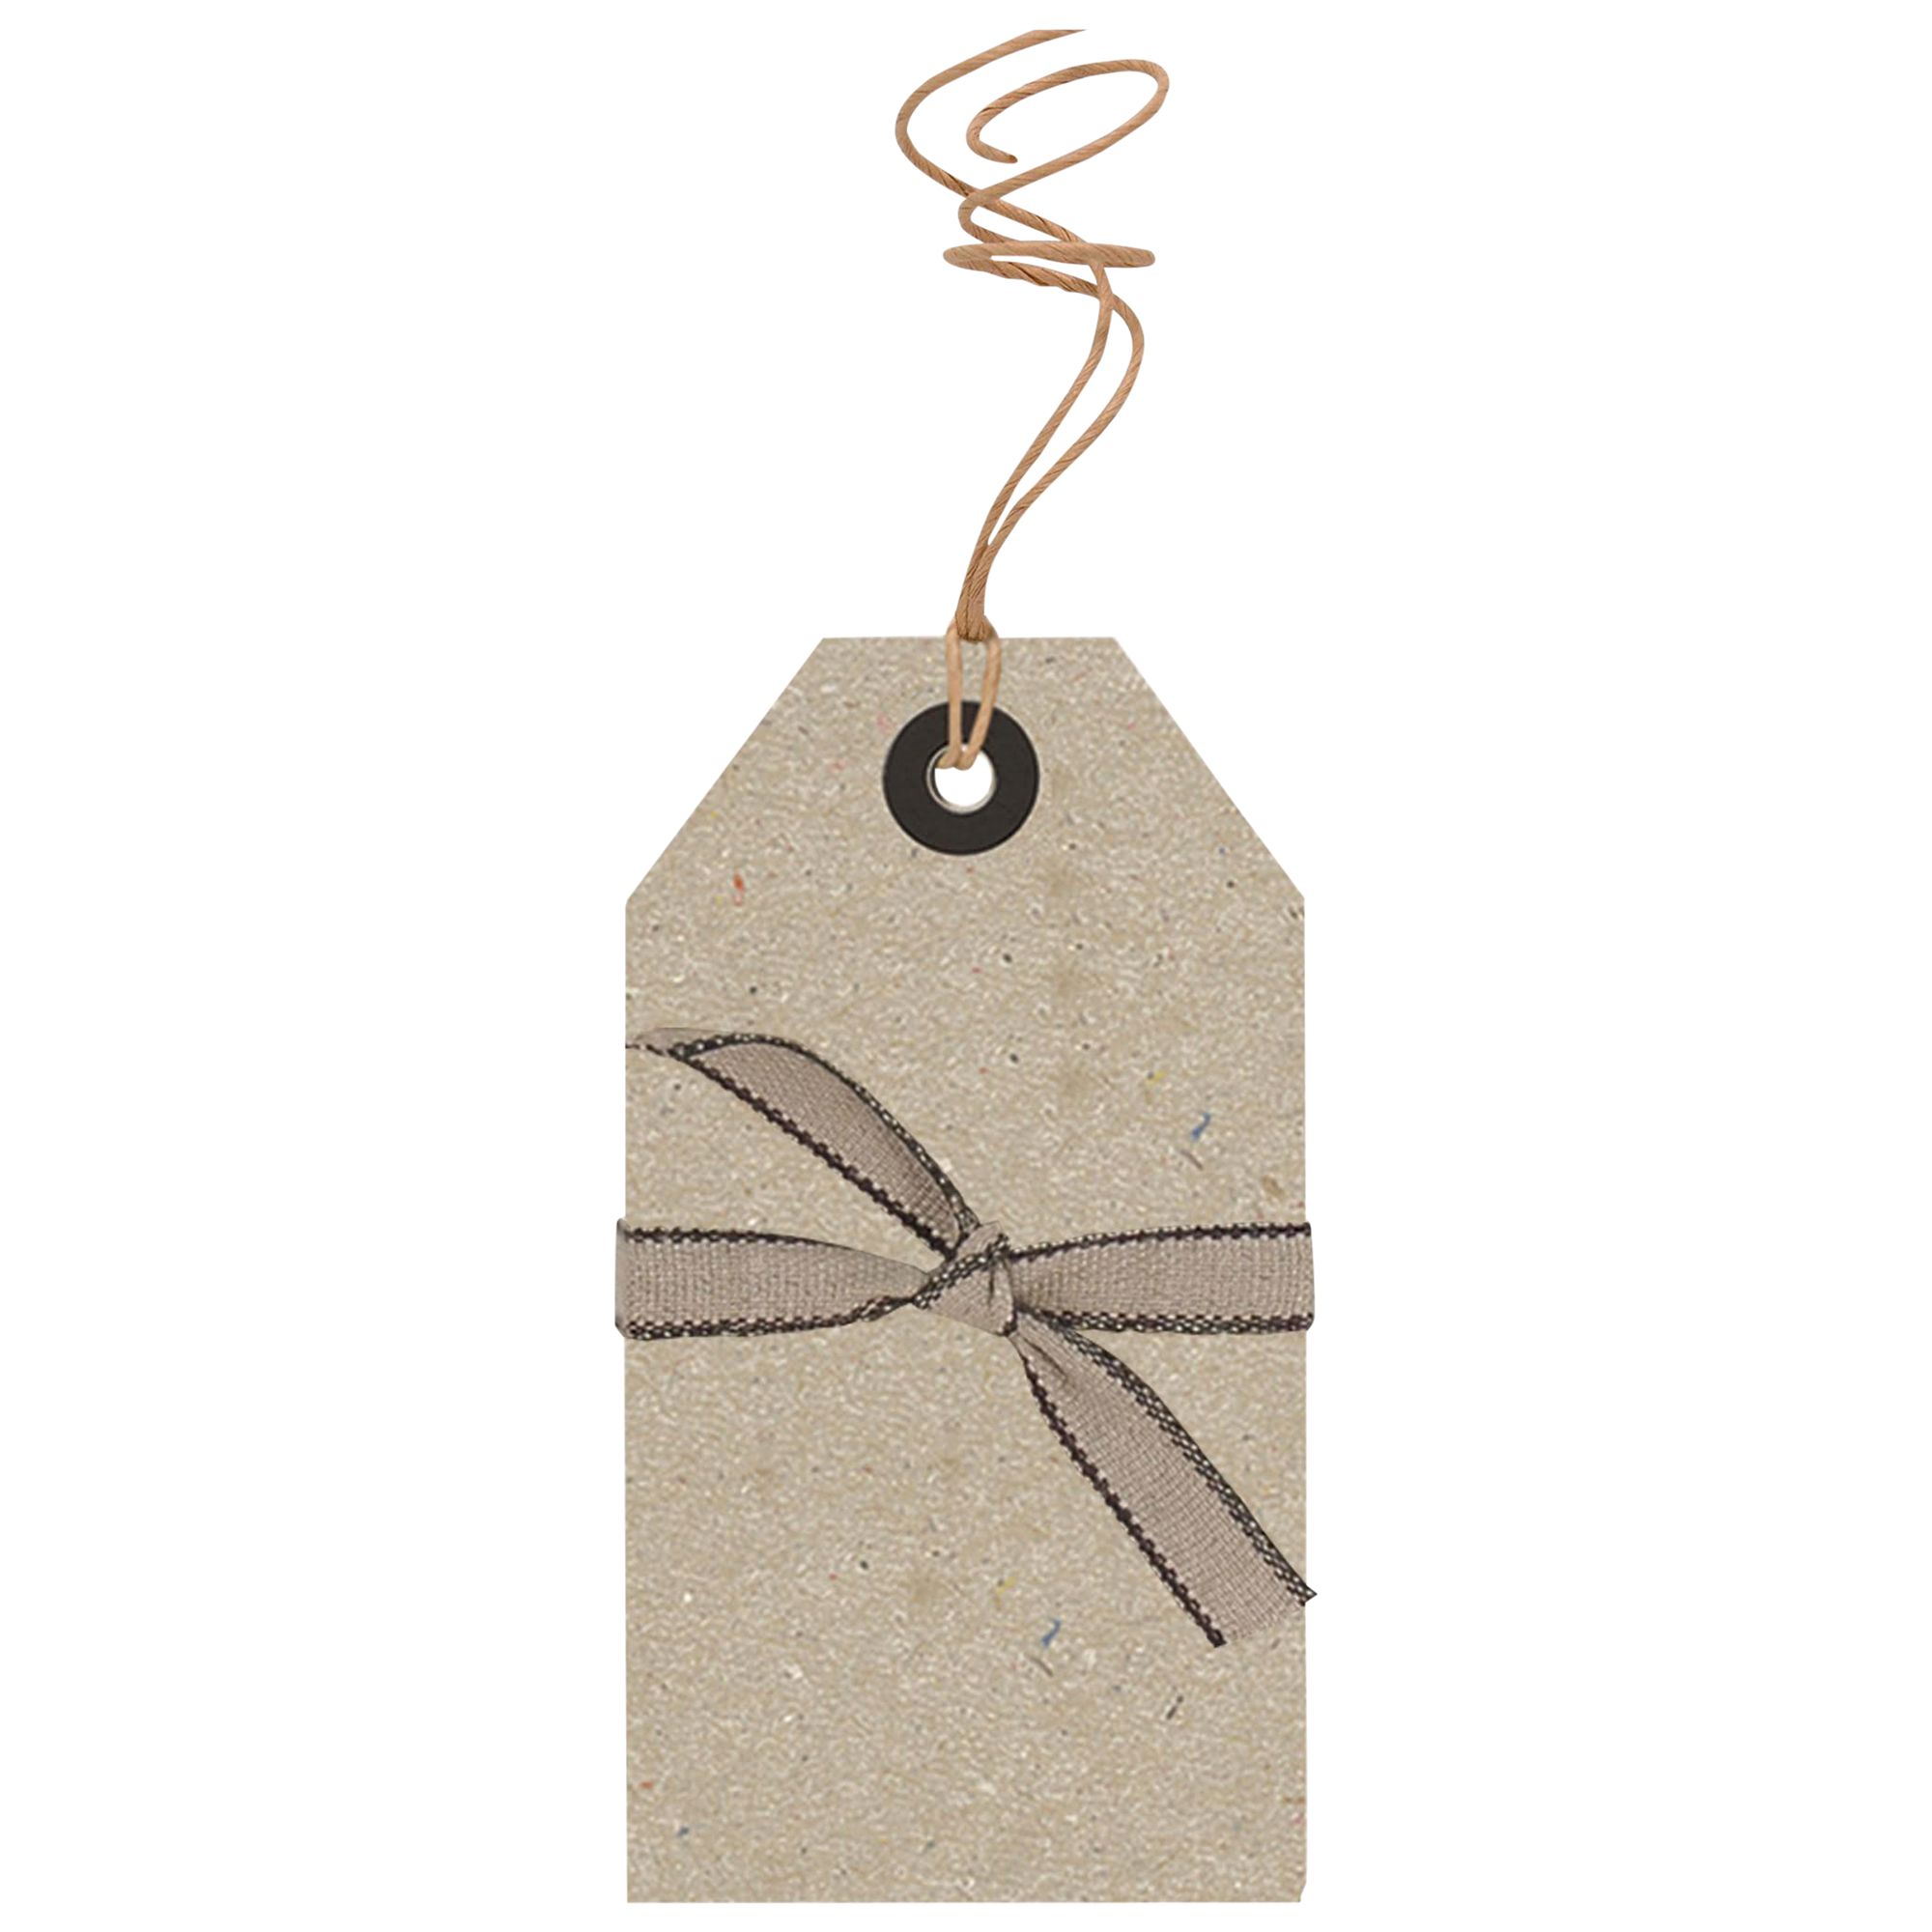 East of India Natural Gift Tags, Set of 6